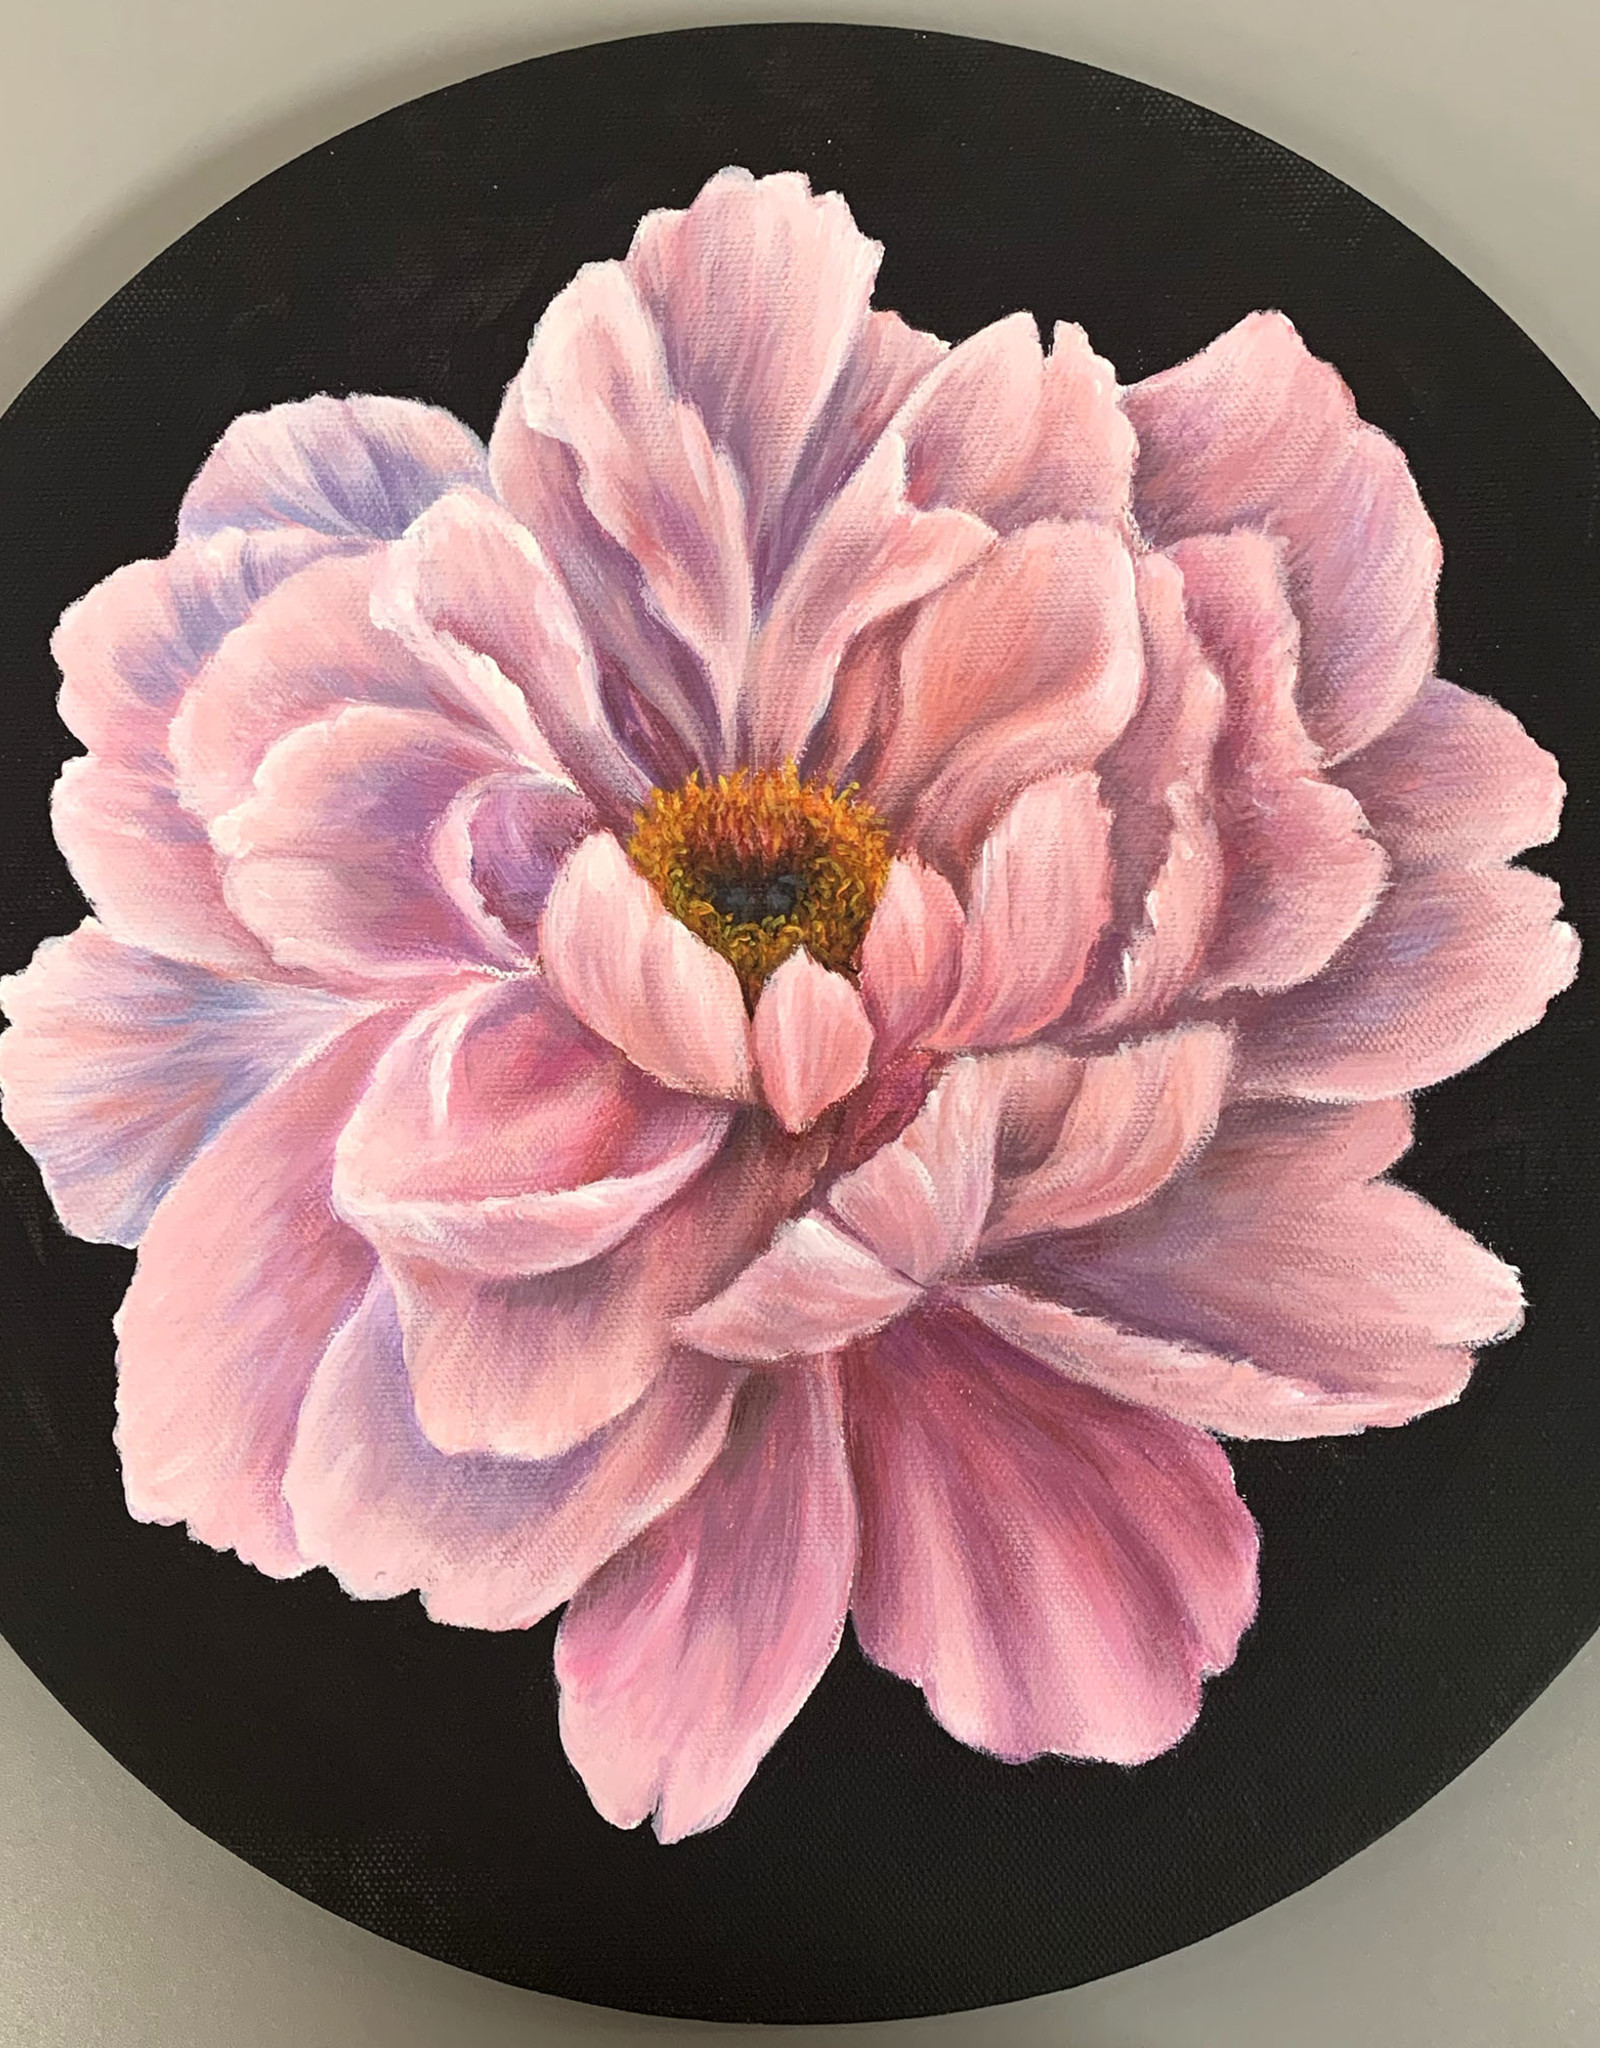 Olha K Acrylic Art class Pink rose on round canvas Fri March 31 6:00 to 8:00 pm